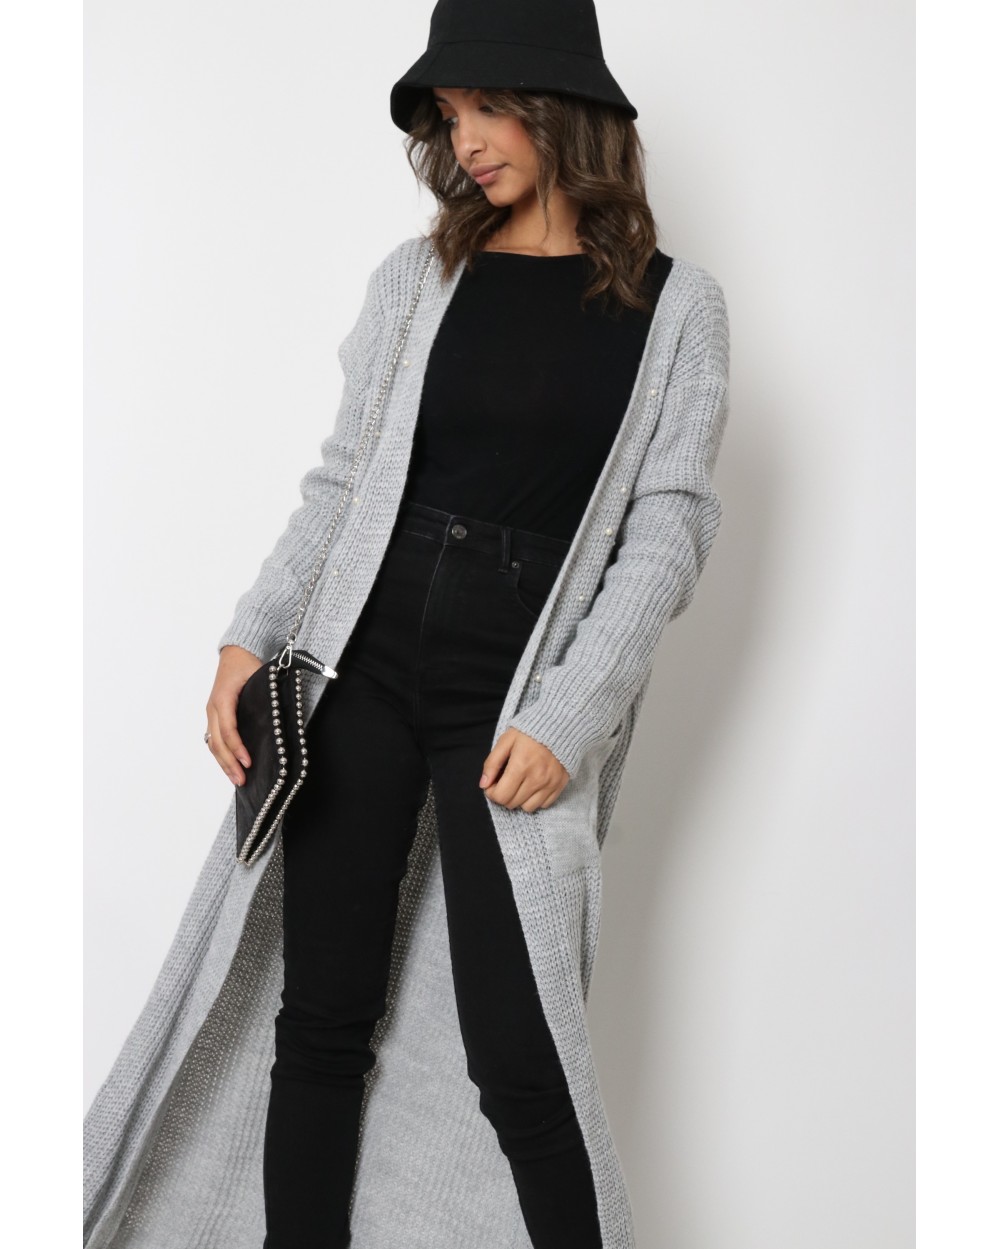 Perle Long Waist Cardigan with pockets